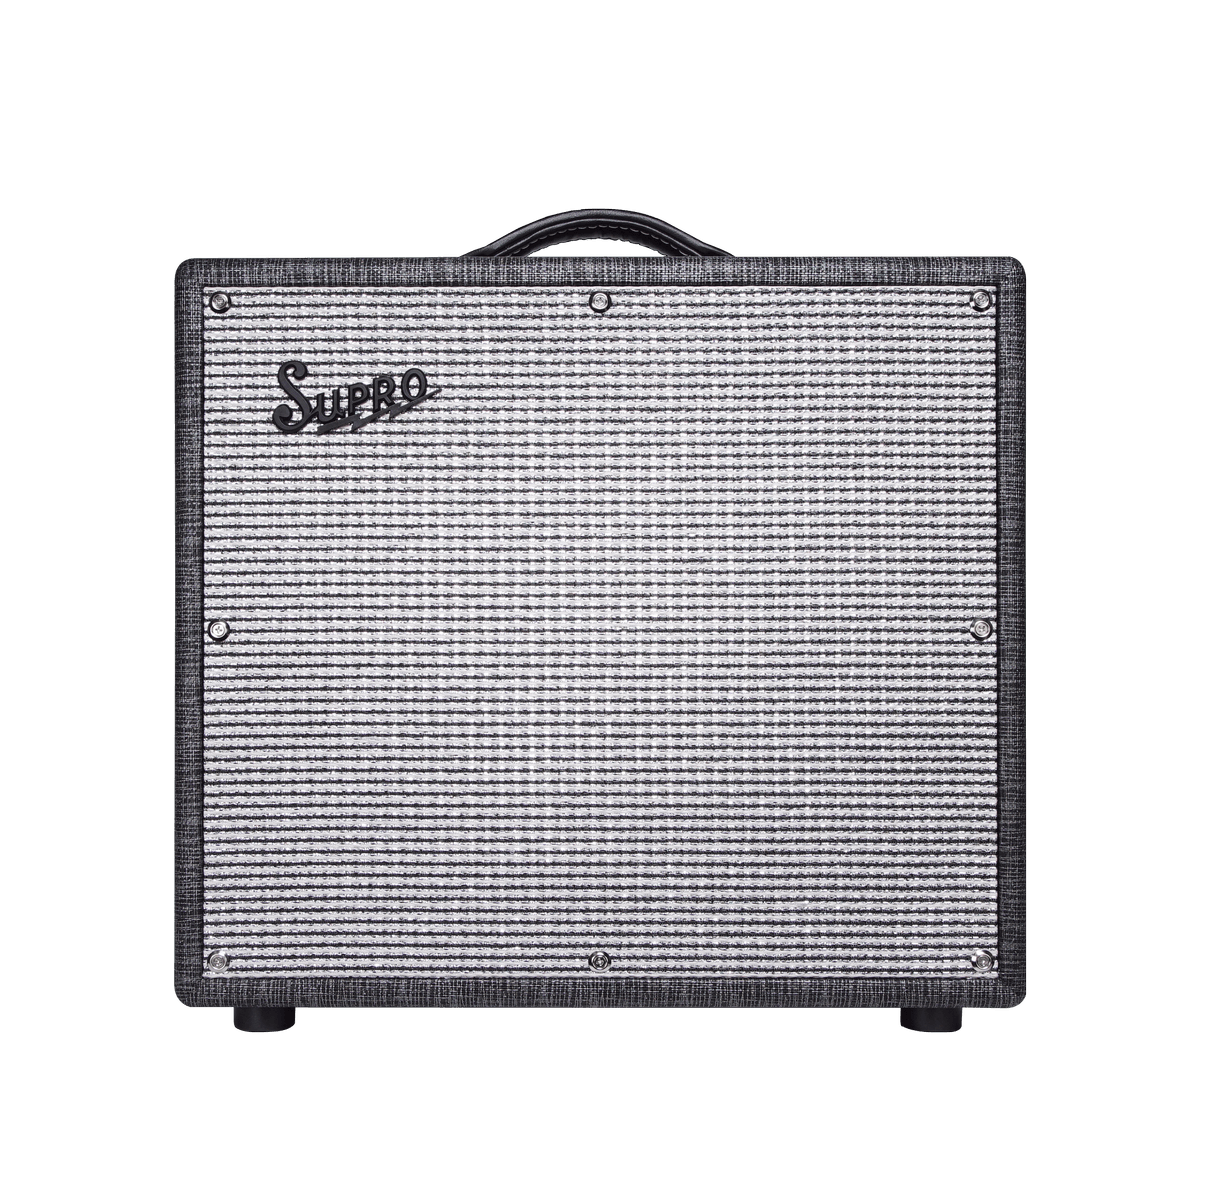 Supro Black Magick Reverb Amplifier Now Shipping!